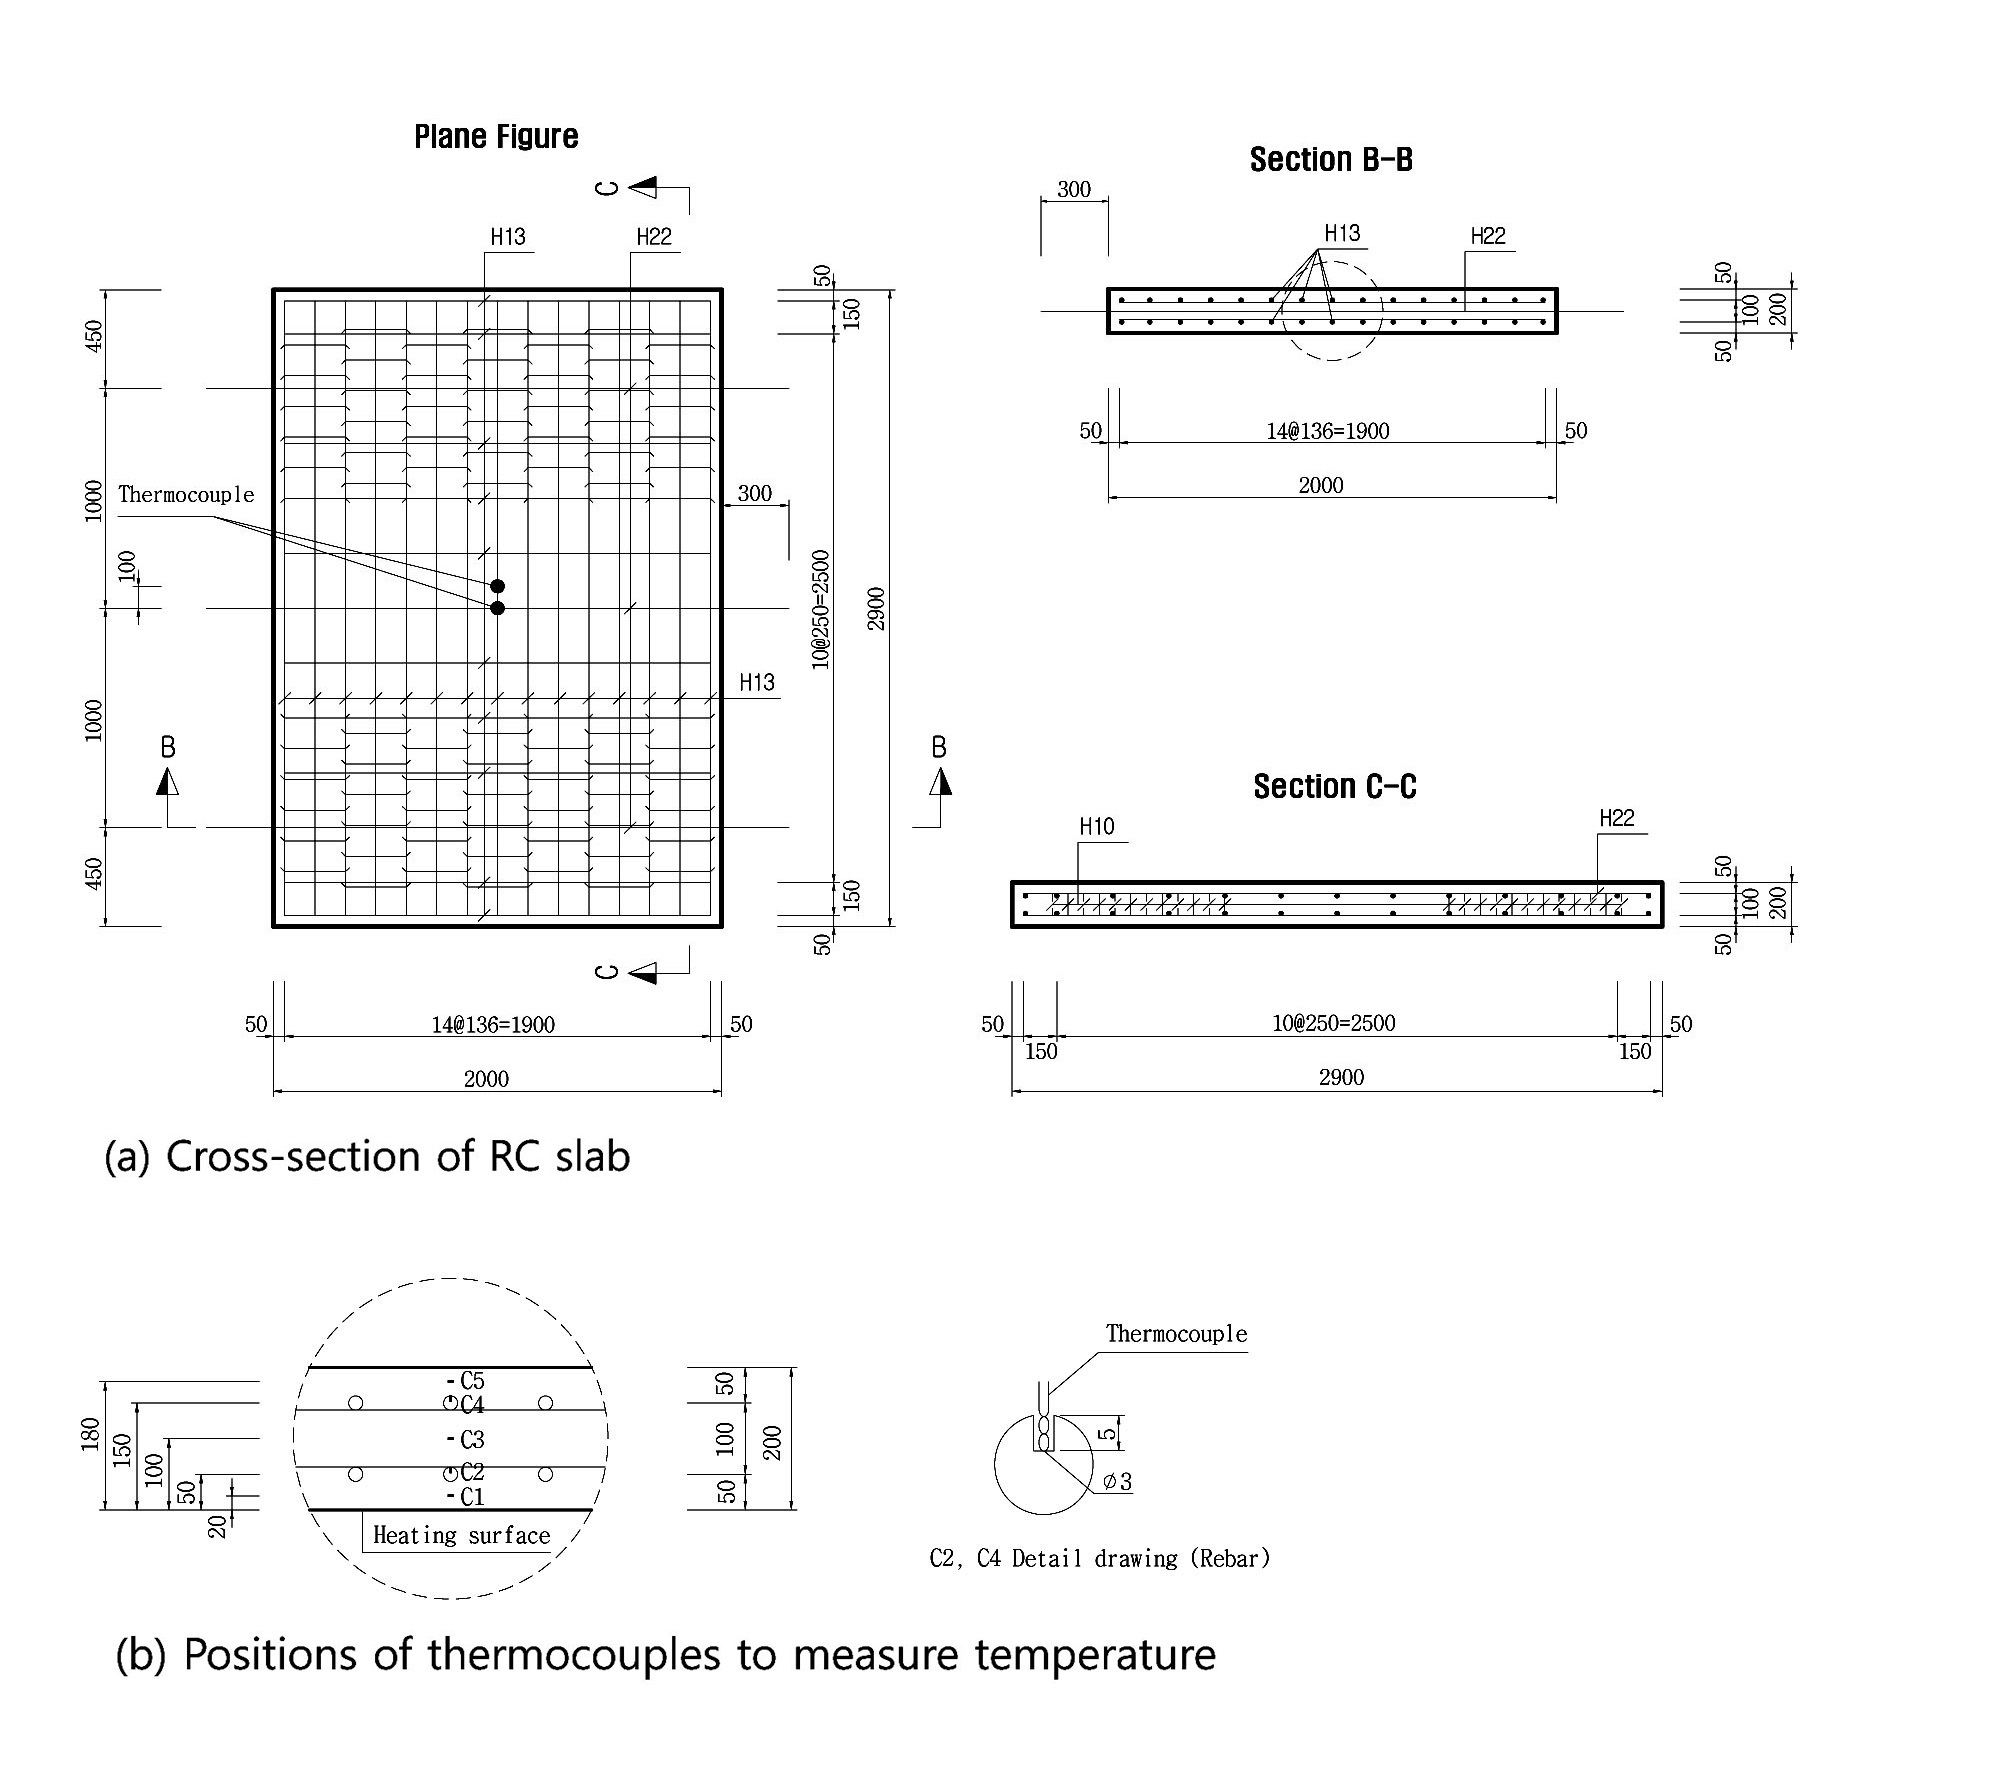 Cross-section and Positions of Thermocouples to Measure Temperature